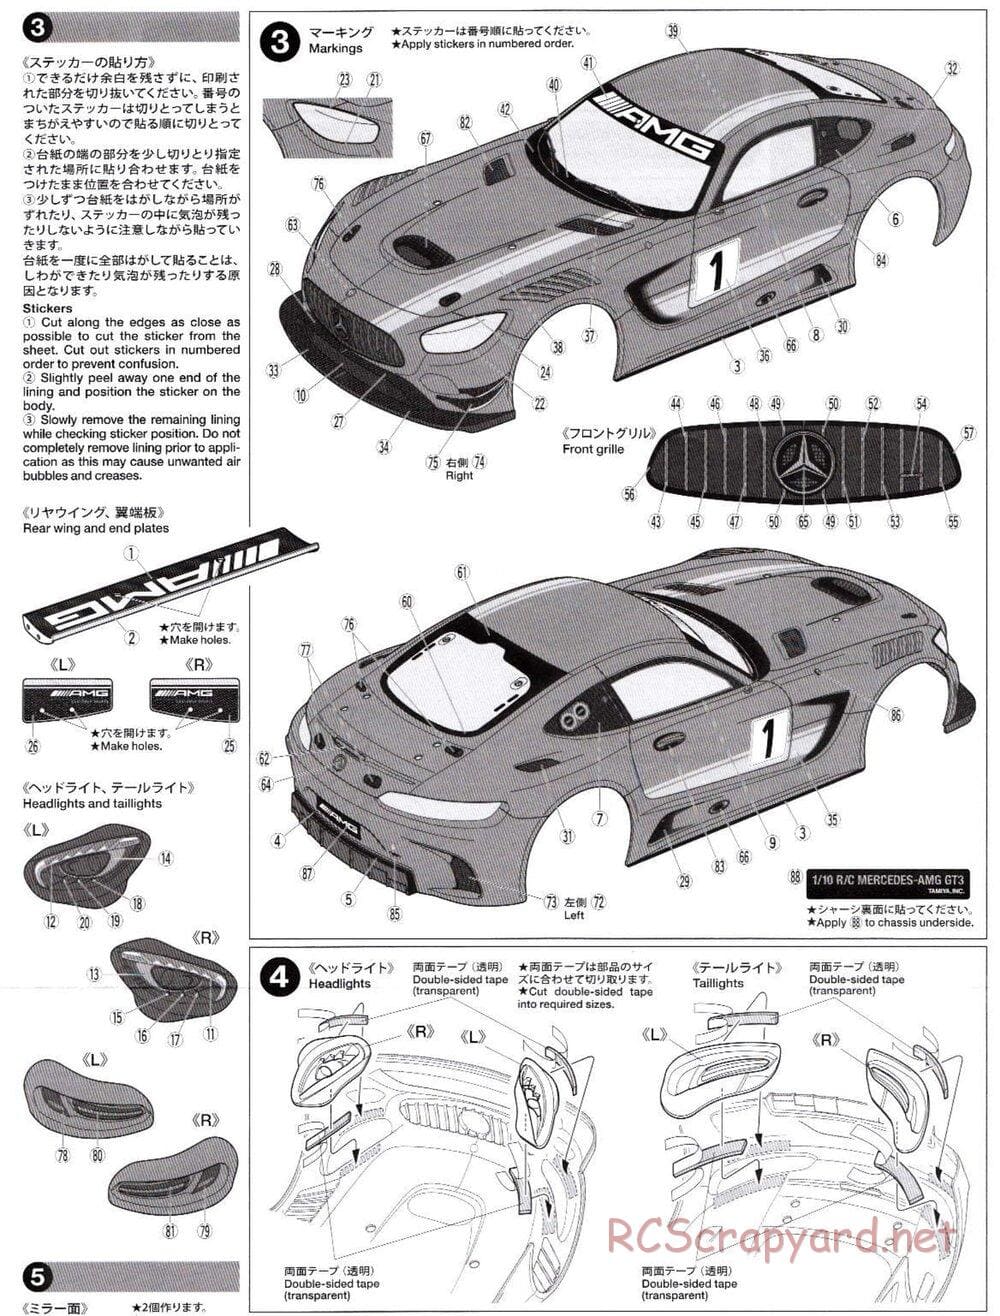 Tamiya - Mercedes AMG GT3 - TT-02 Chassis - Body Manual - Page 4